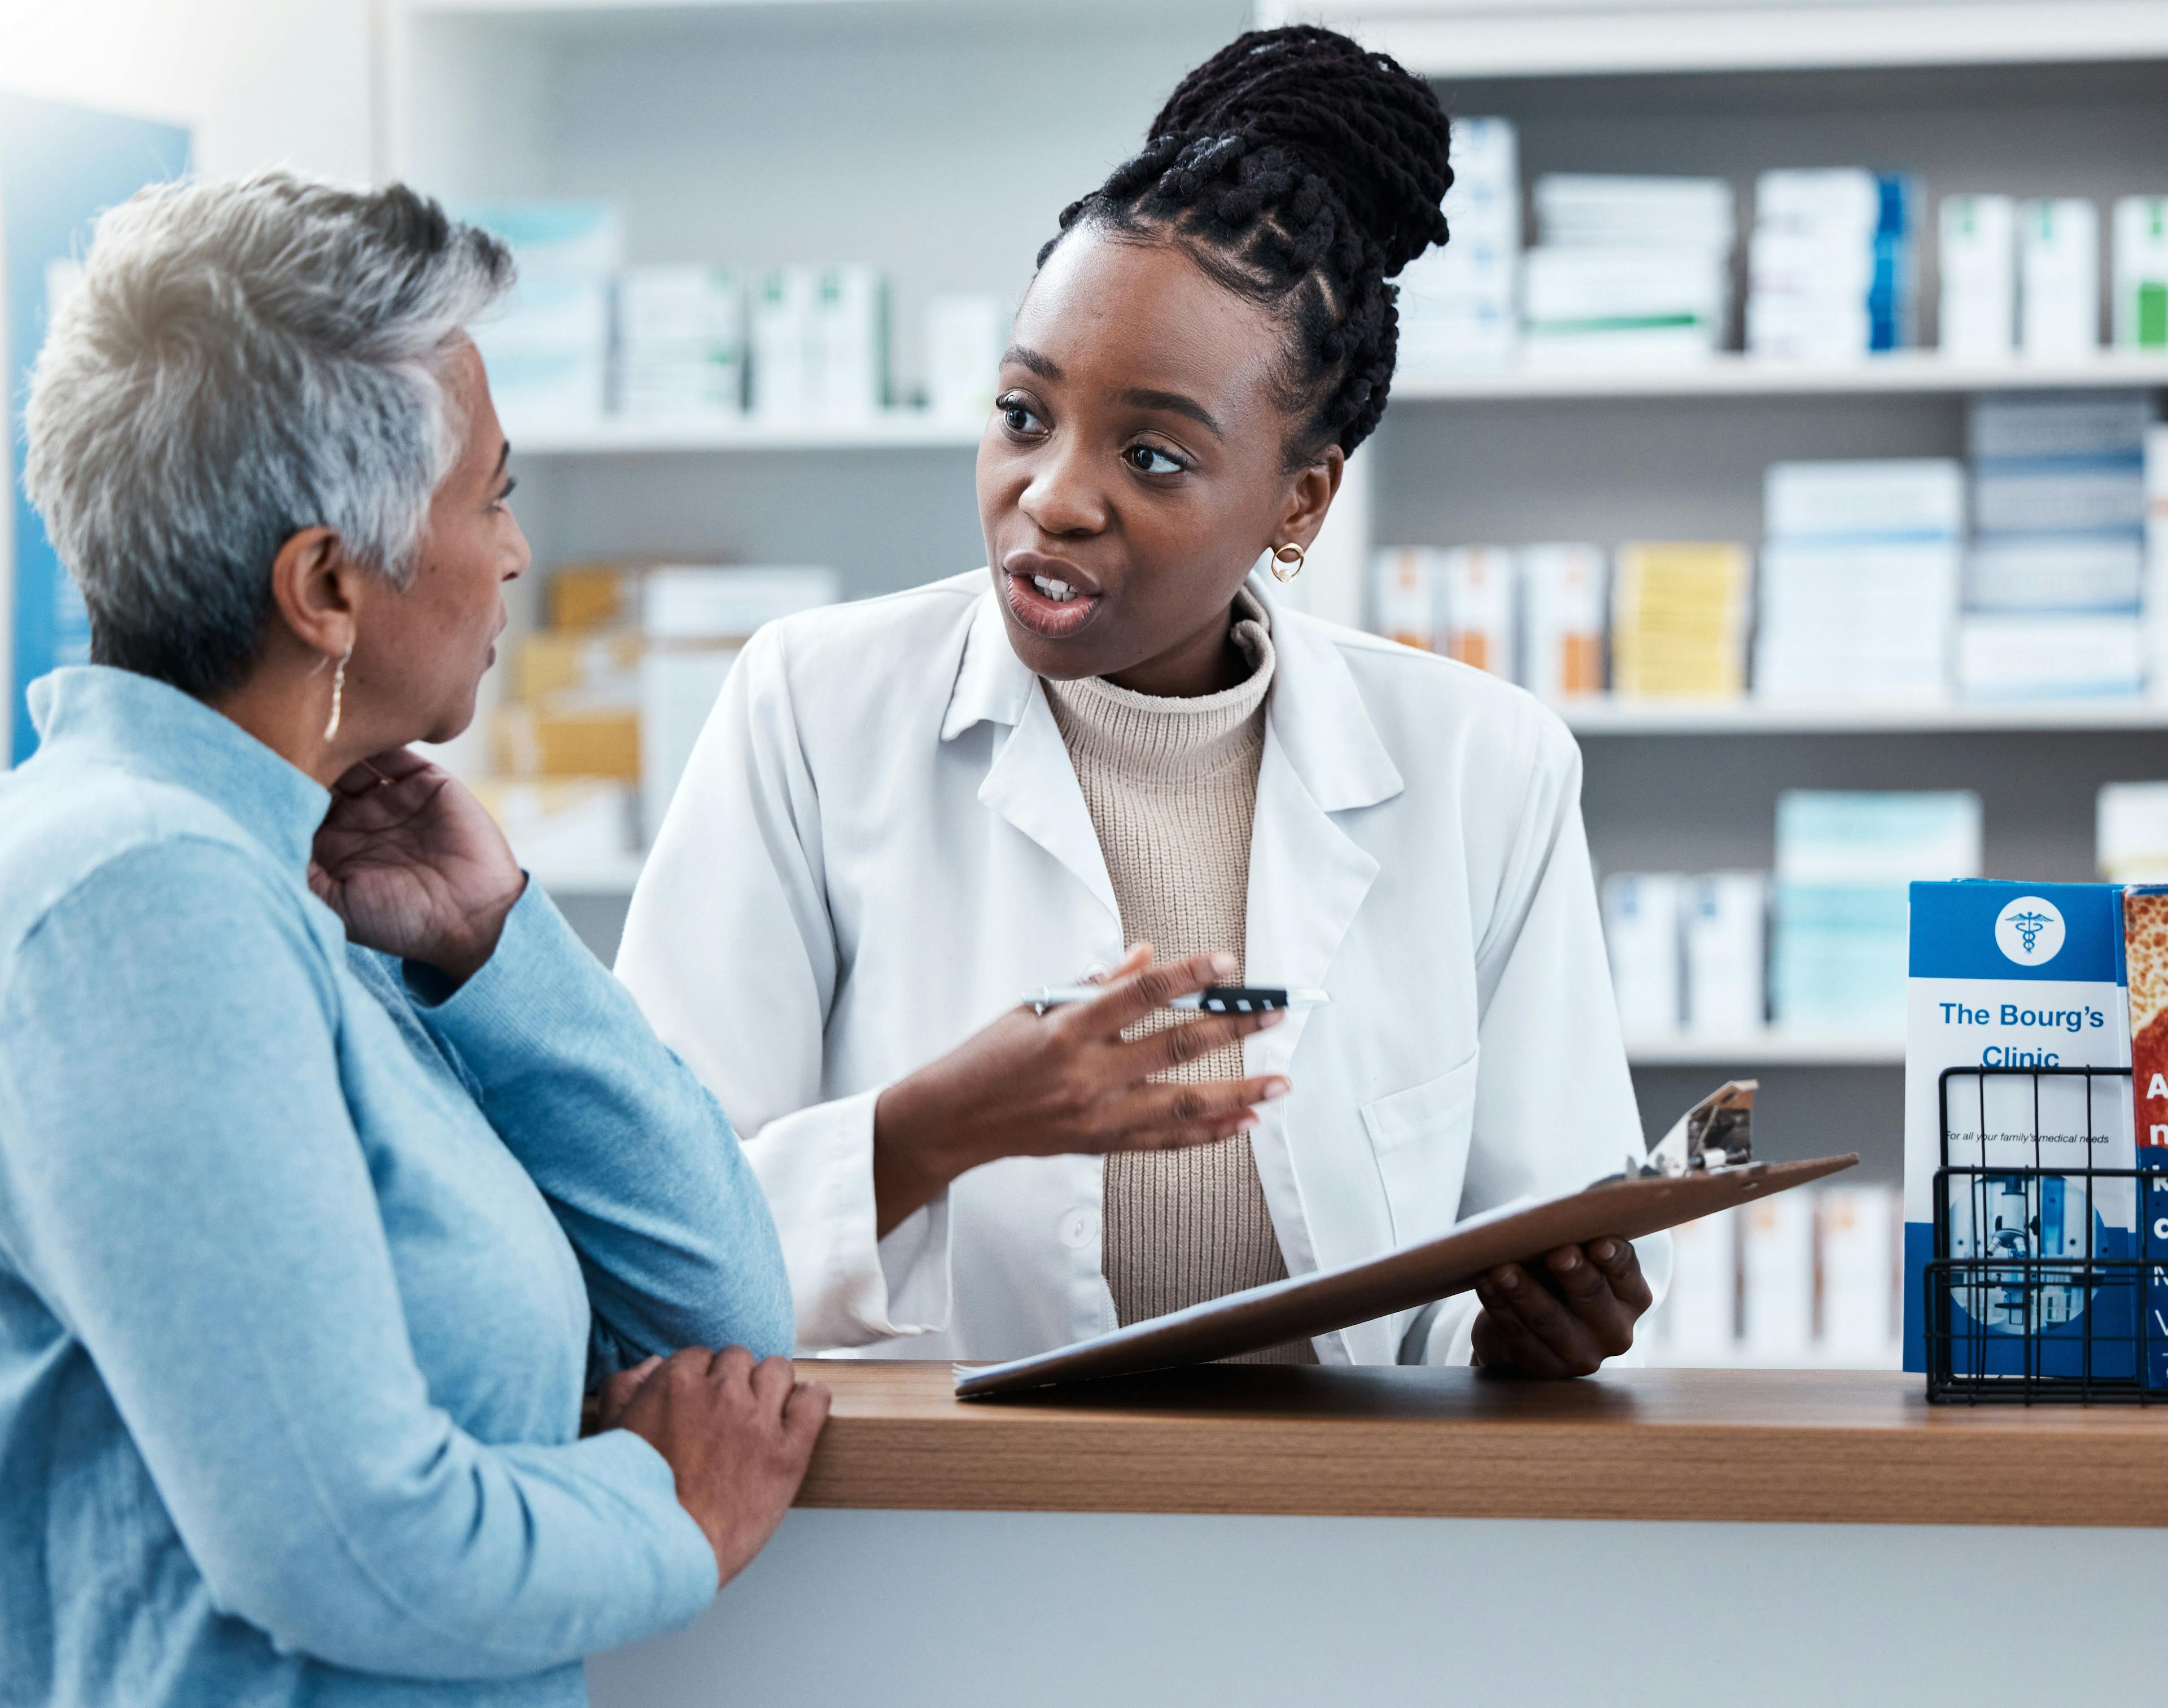 Pharmacy, medical or insurance with a customer and black woman pharmacist in a dispensary. Healthcare, clipboard and trust with a female medicine professional helping a patient in a drugstore - Image credit: Malik E/peopleimages.com | stock.adobe.com